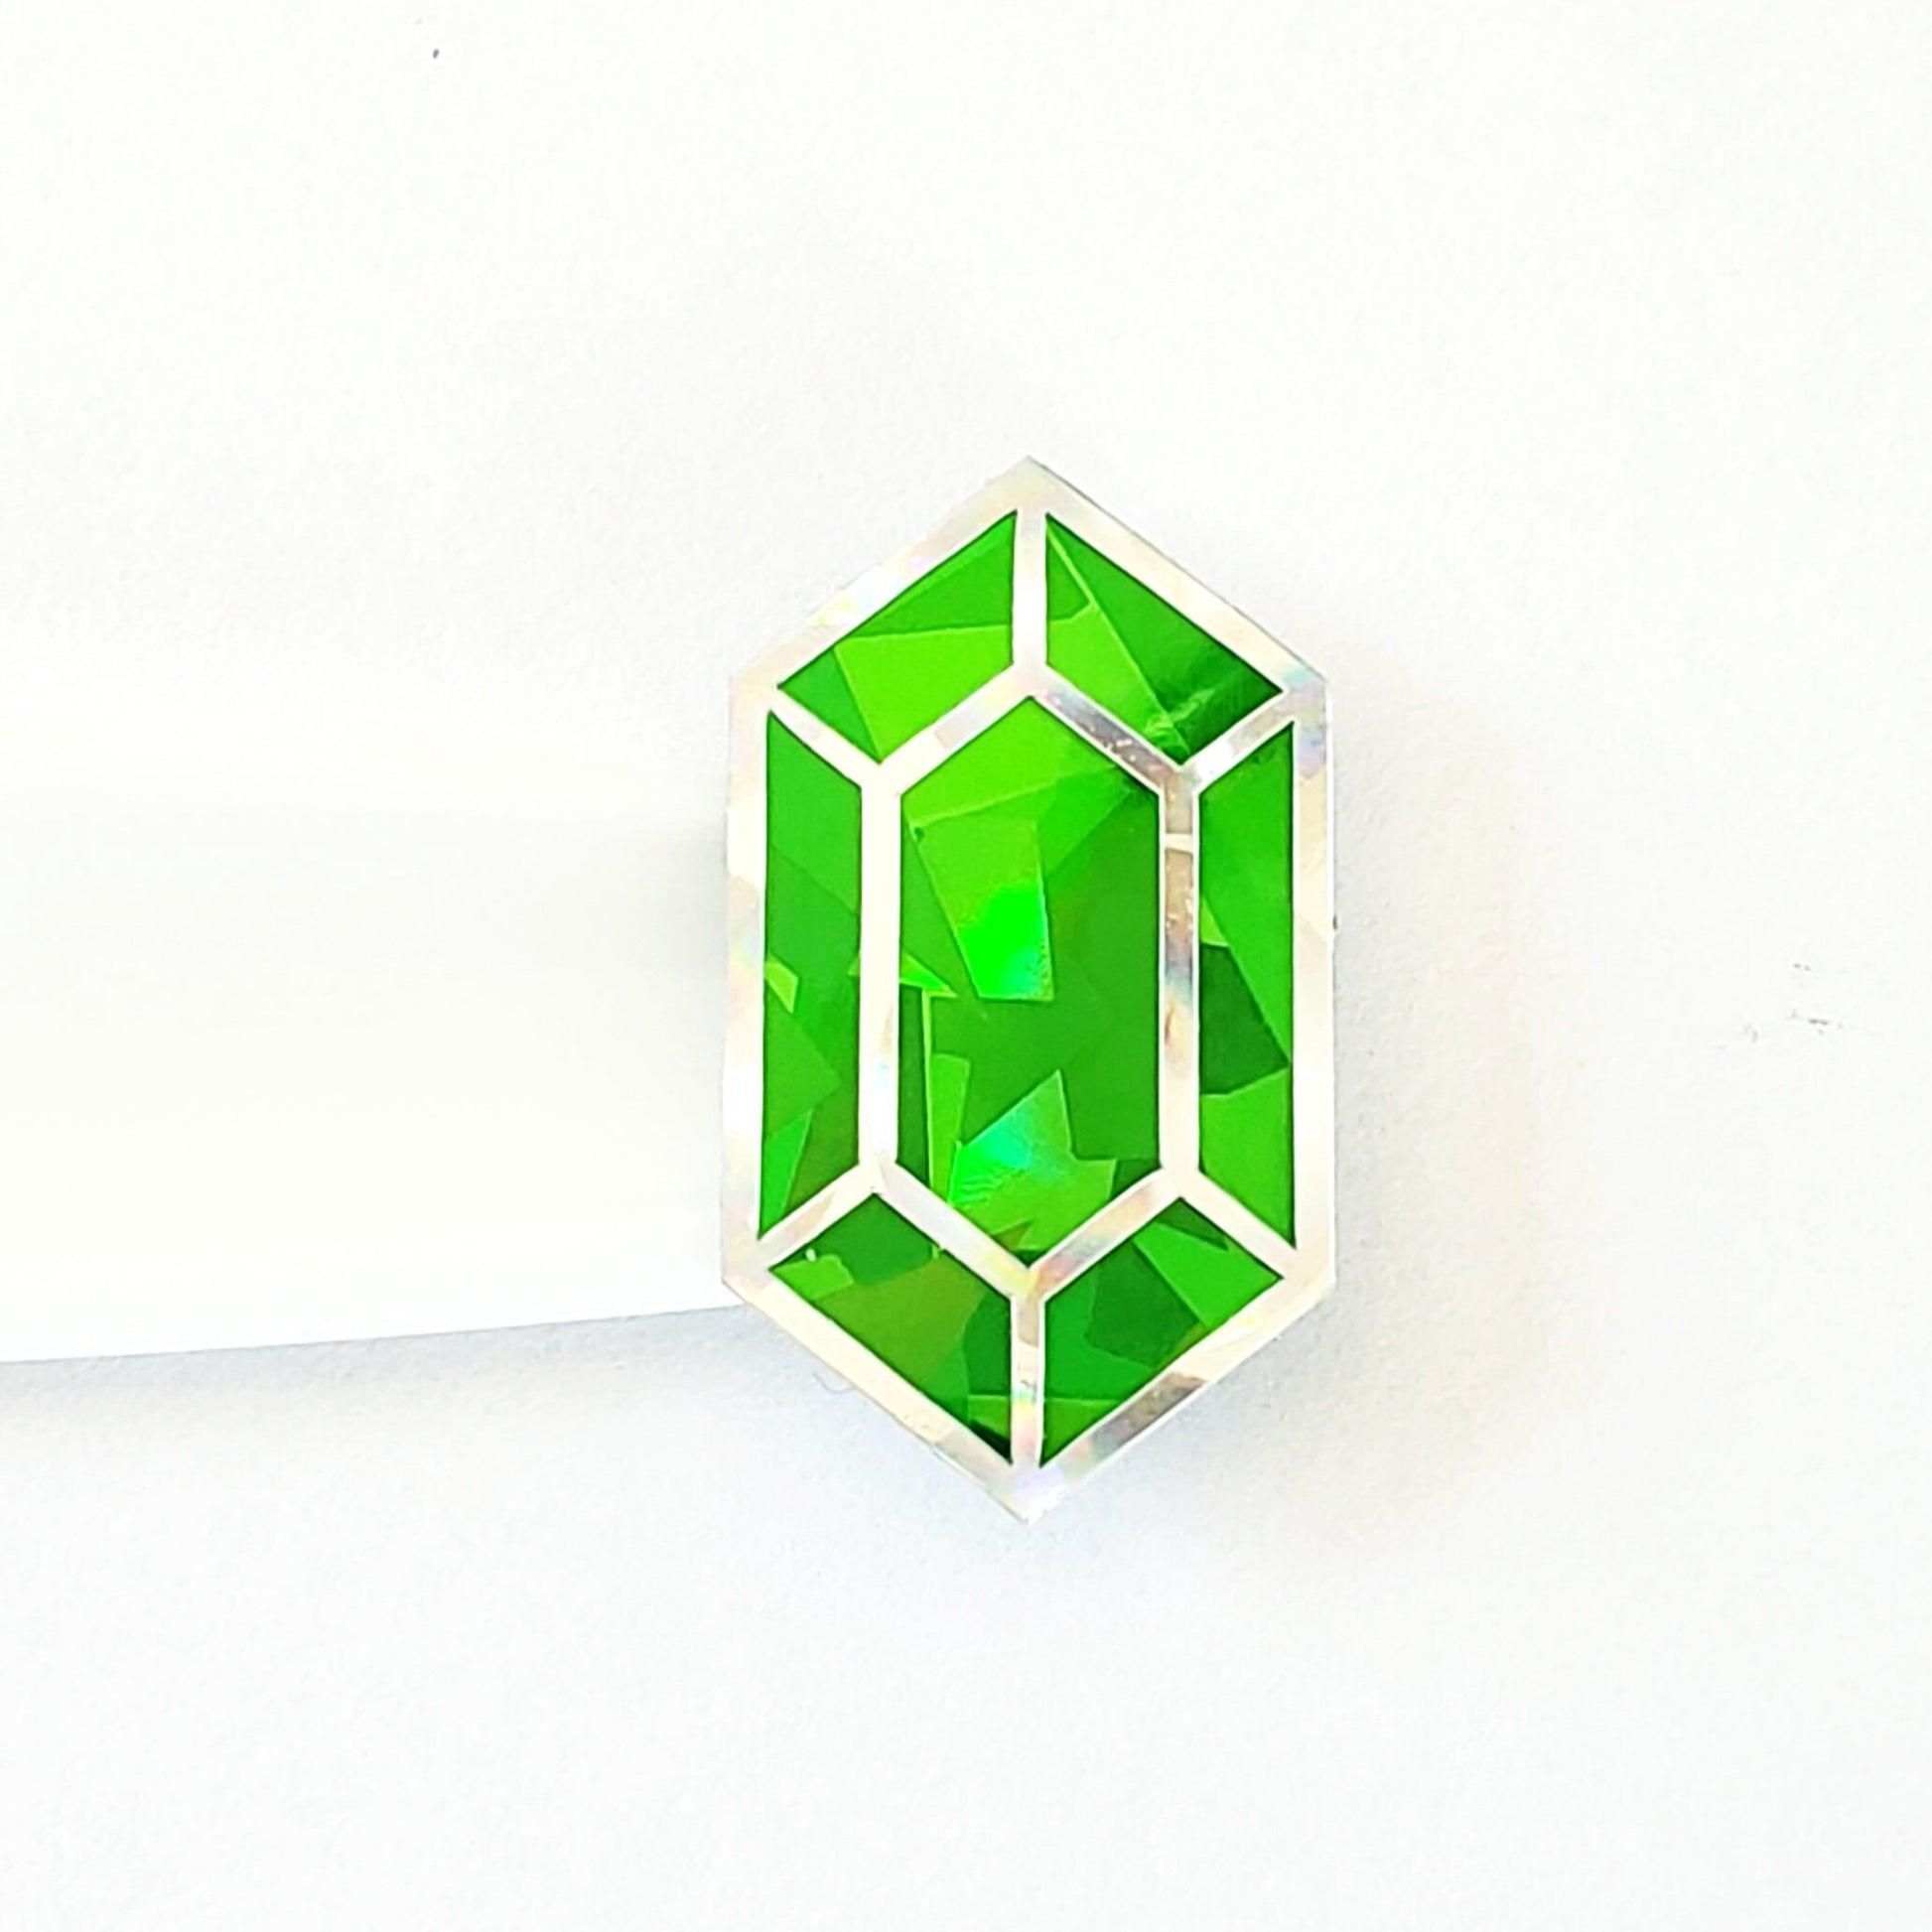 Light Green Jewel Stickers, set of 36 sparkly green peridot faux rupee gemstone stickers for August birthday, Virgo zodiac gift.